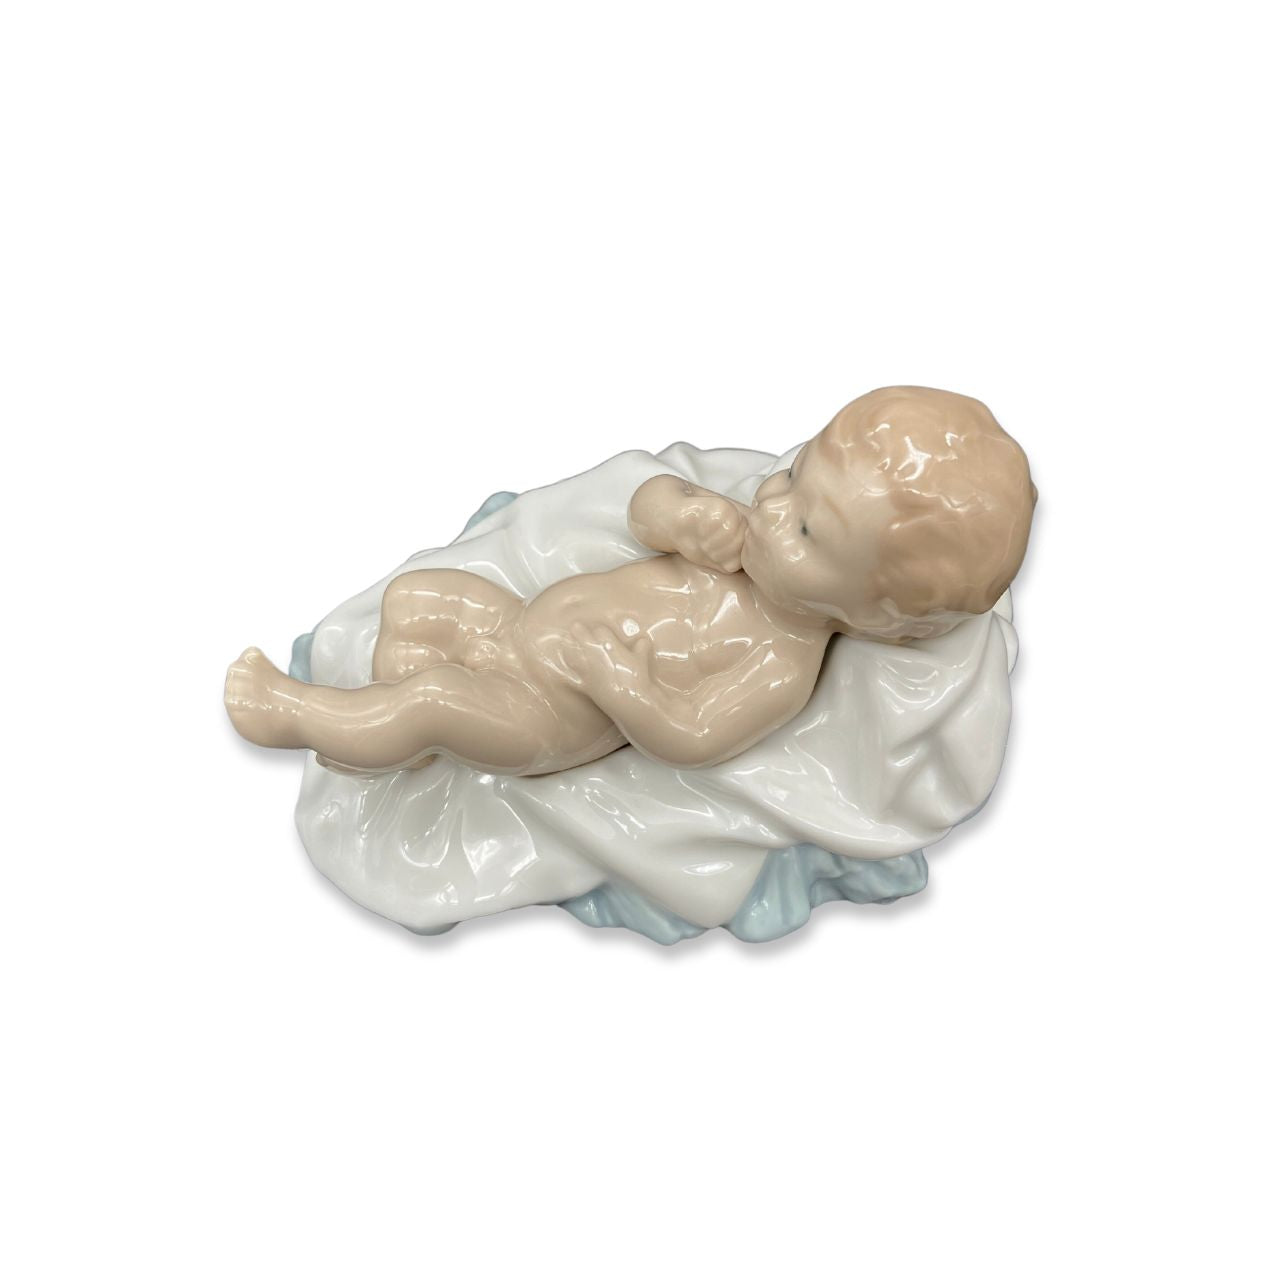 Nao by Lladro Baby Jesus  Nao porcelain figurine “Baby Jesus” from the Christmas Collection.  Sculpted by Salvador Furió, this figurine is part of the nativity set.  Nao Porcelain Figurines are produced in Valencia Spain and the Company is part of the Lladro family. Each piece is lovingly handmade and hand painted by the Valencia Artisans.